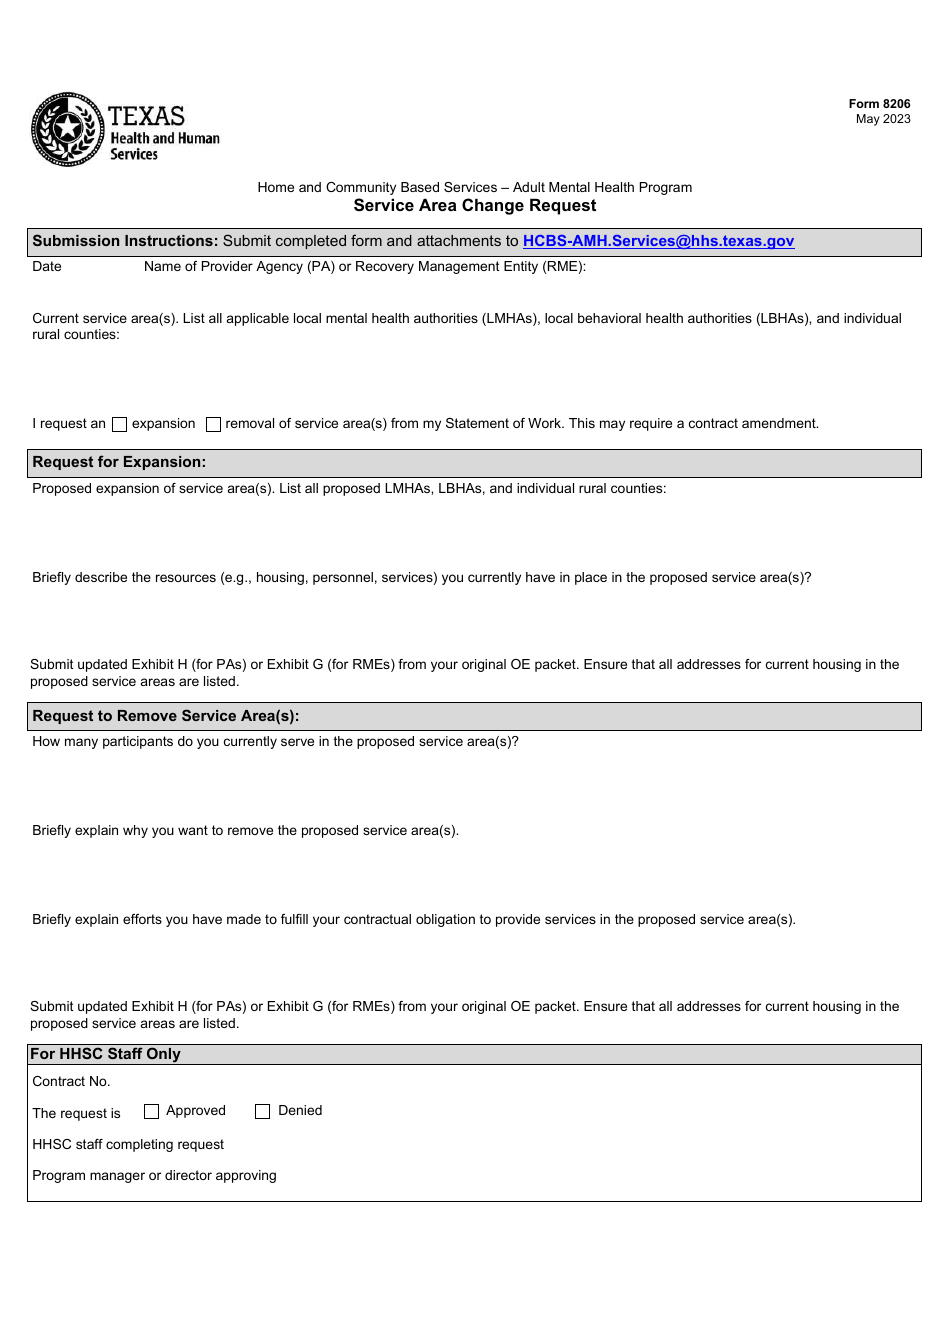 Form 8206 Service Area Change Request - Adult Mental Health Program - Texas, Page 1